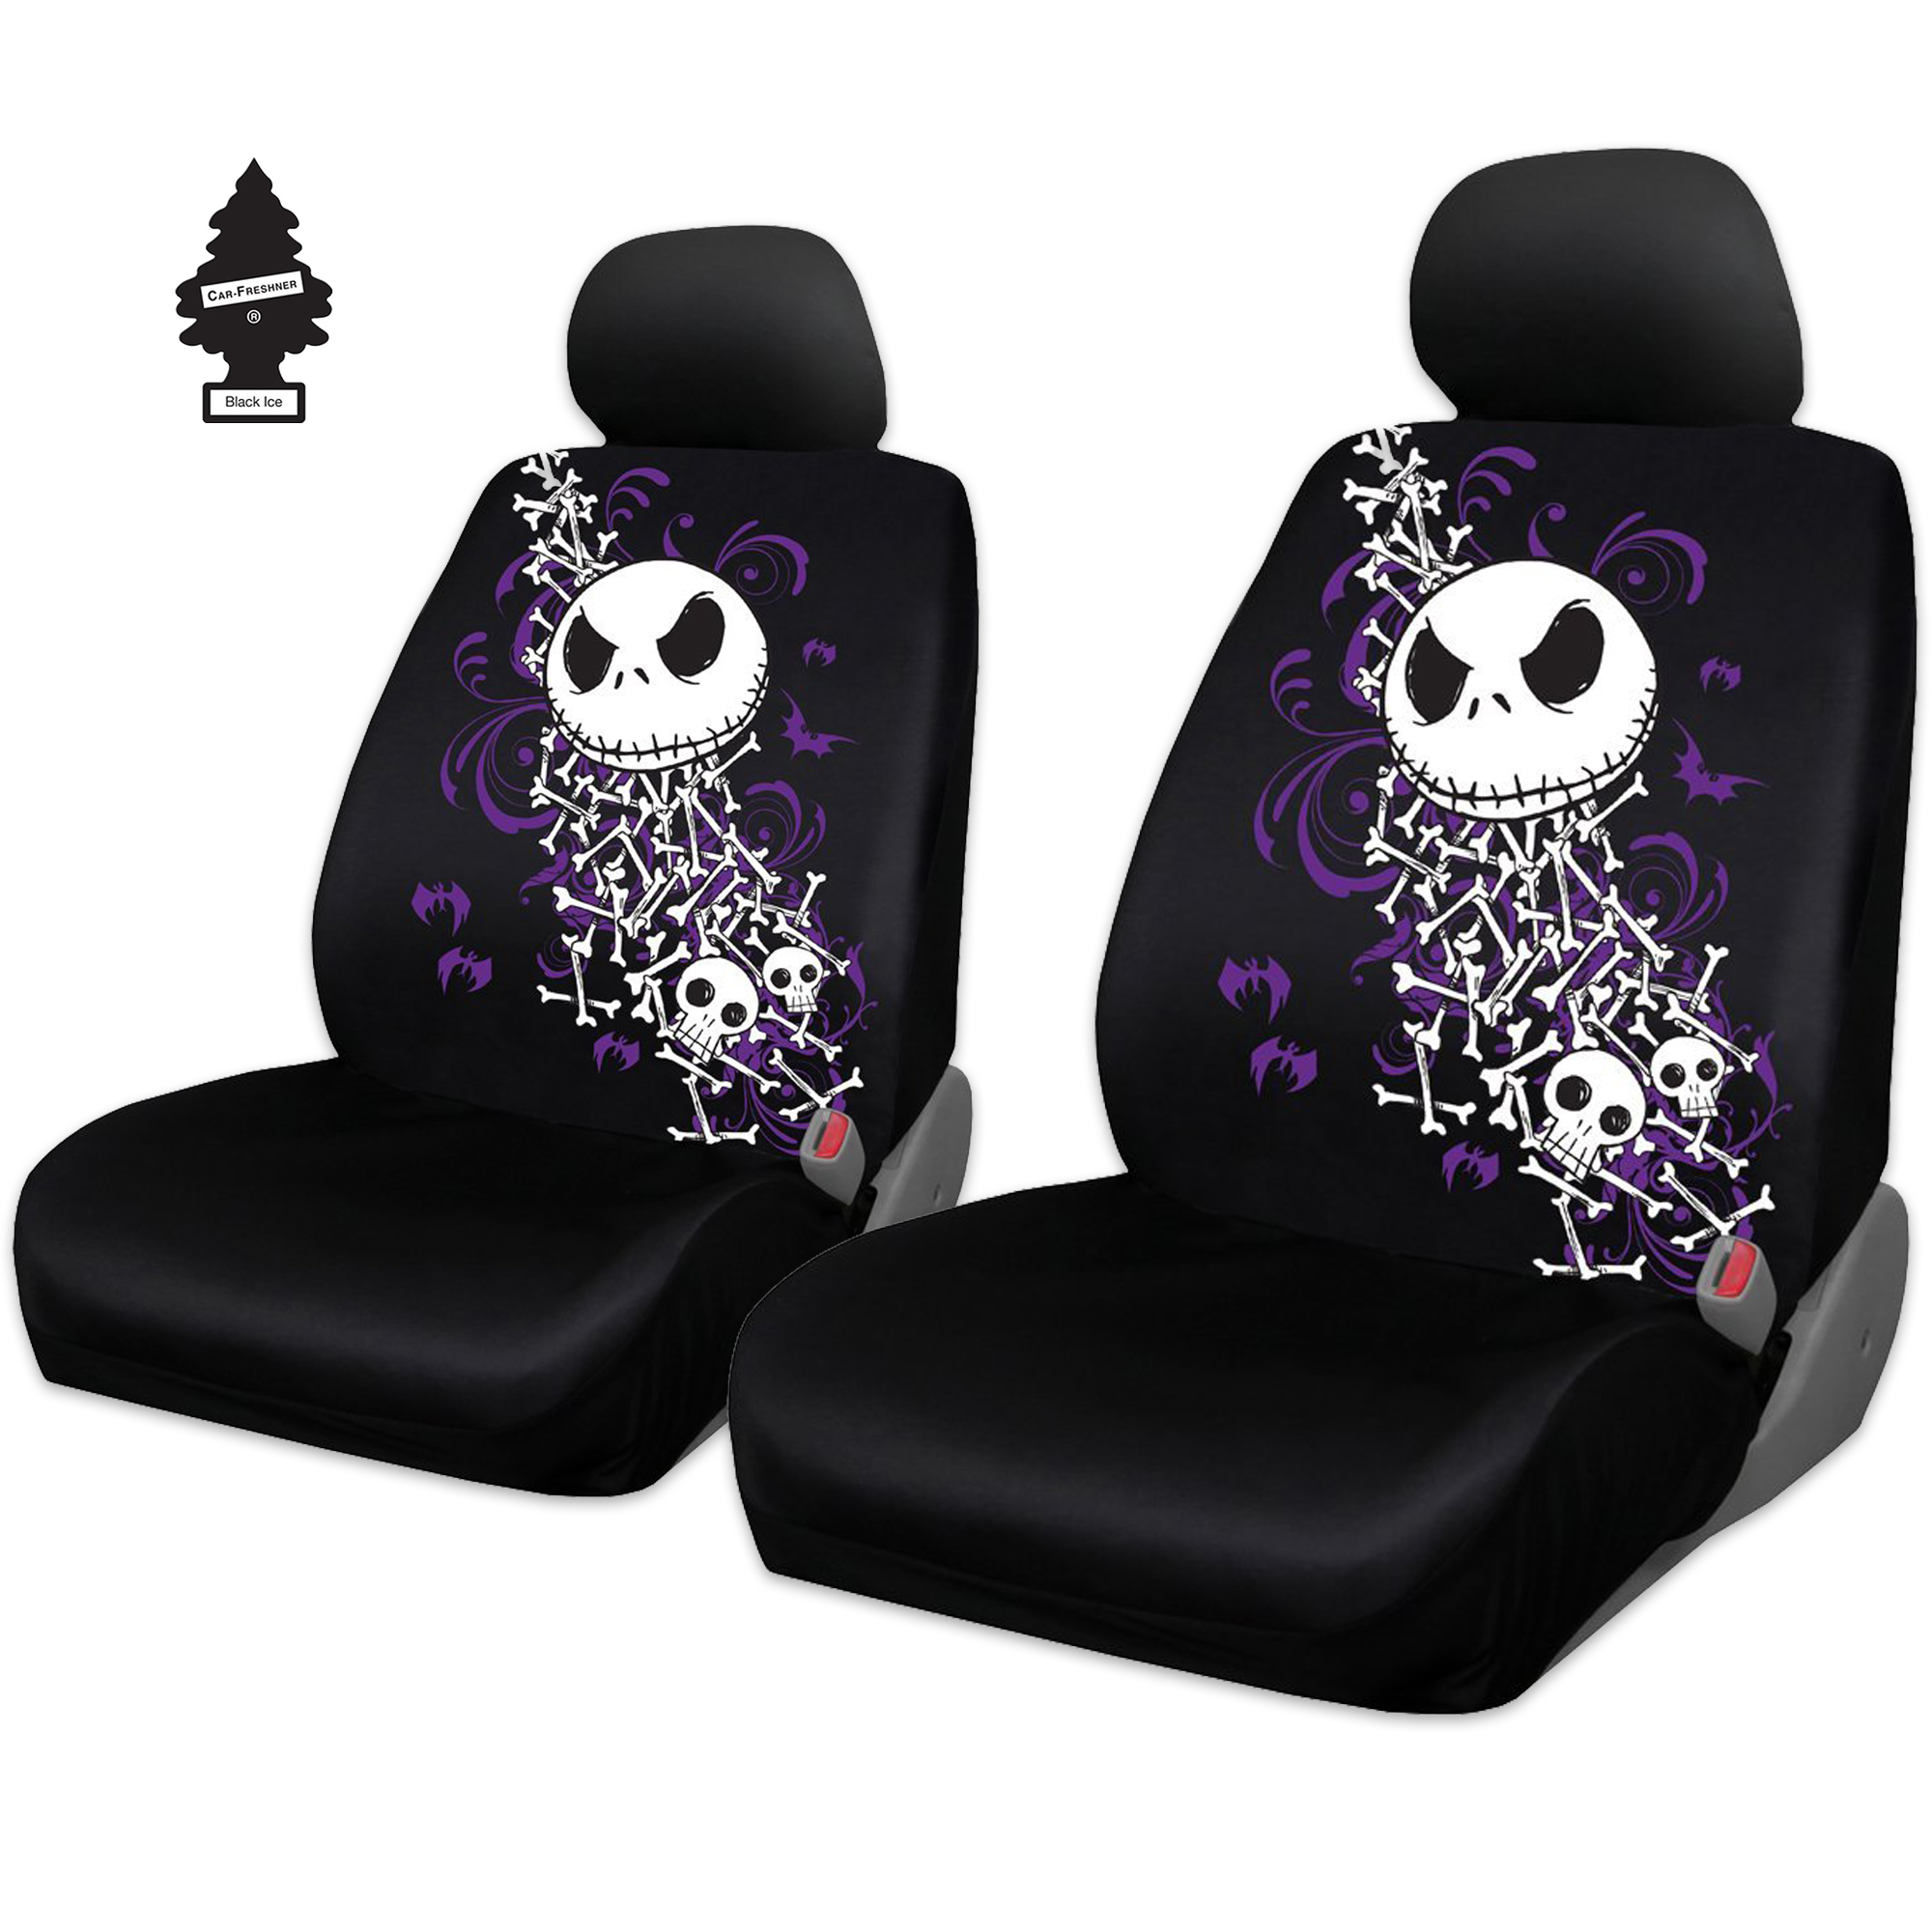 New 5 Pieces Nightmare Before Christmas Jack Skellington Bone Car SUV Low Back Seat Covers Set with Air Freshener - image 1 of 3